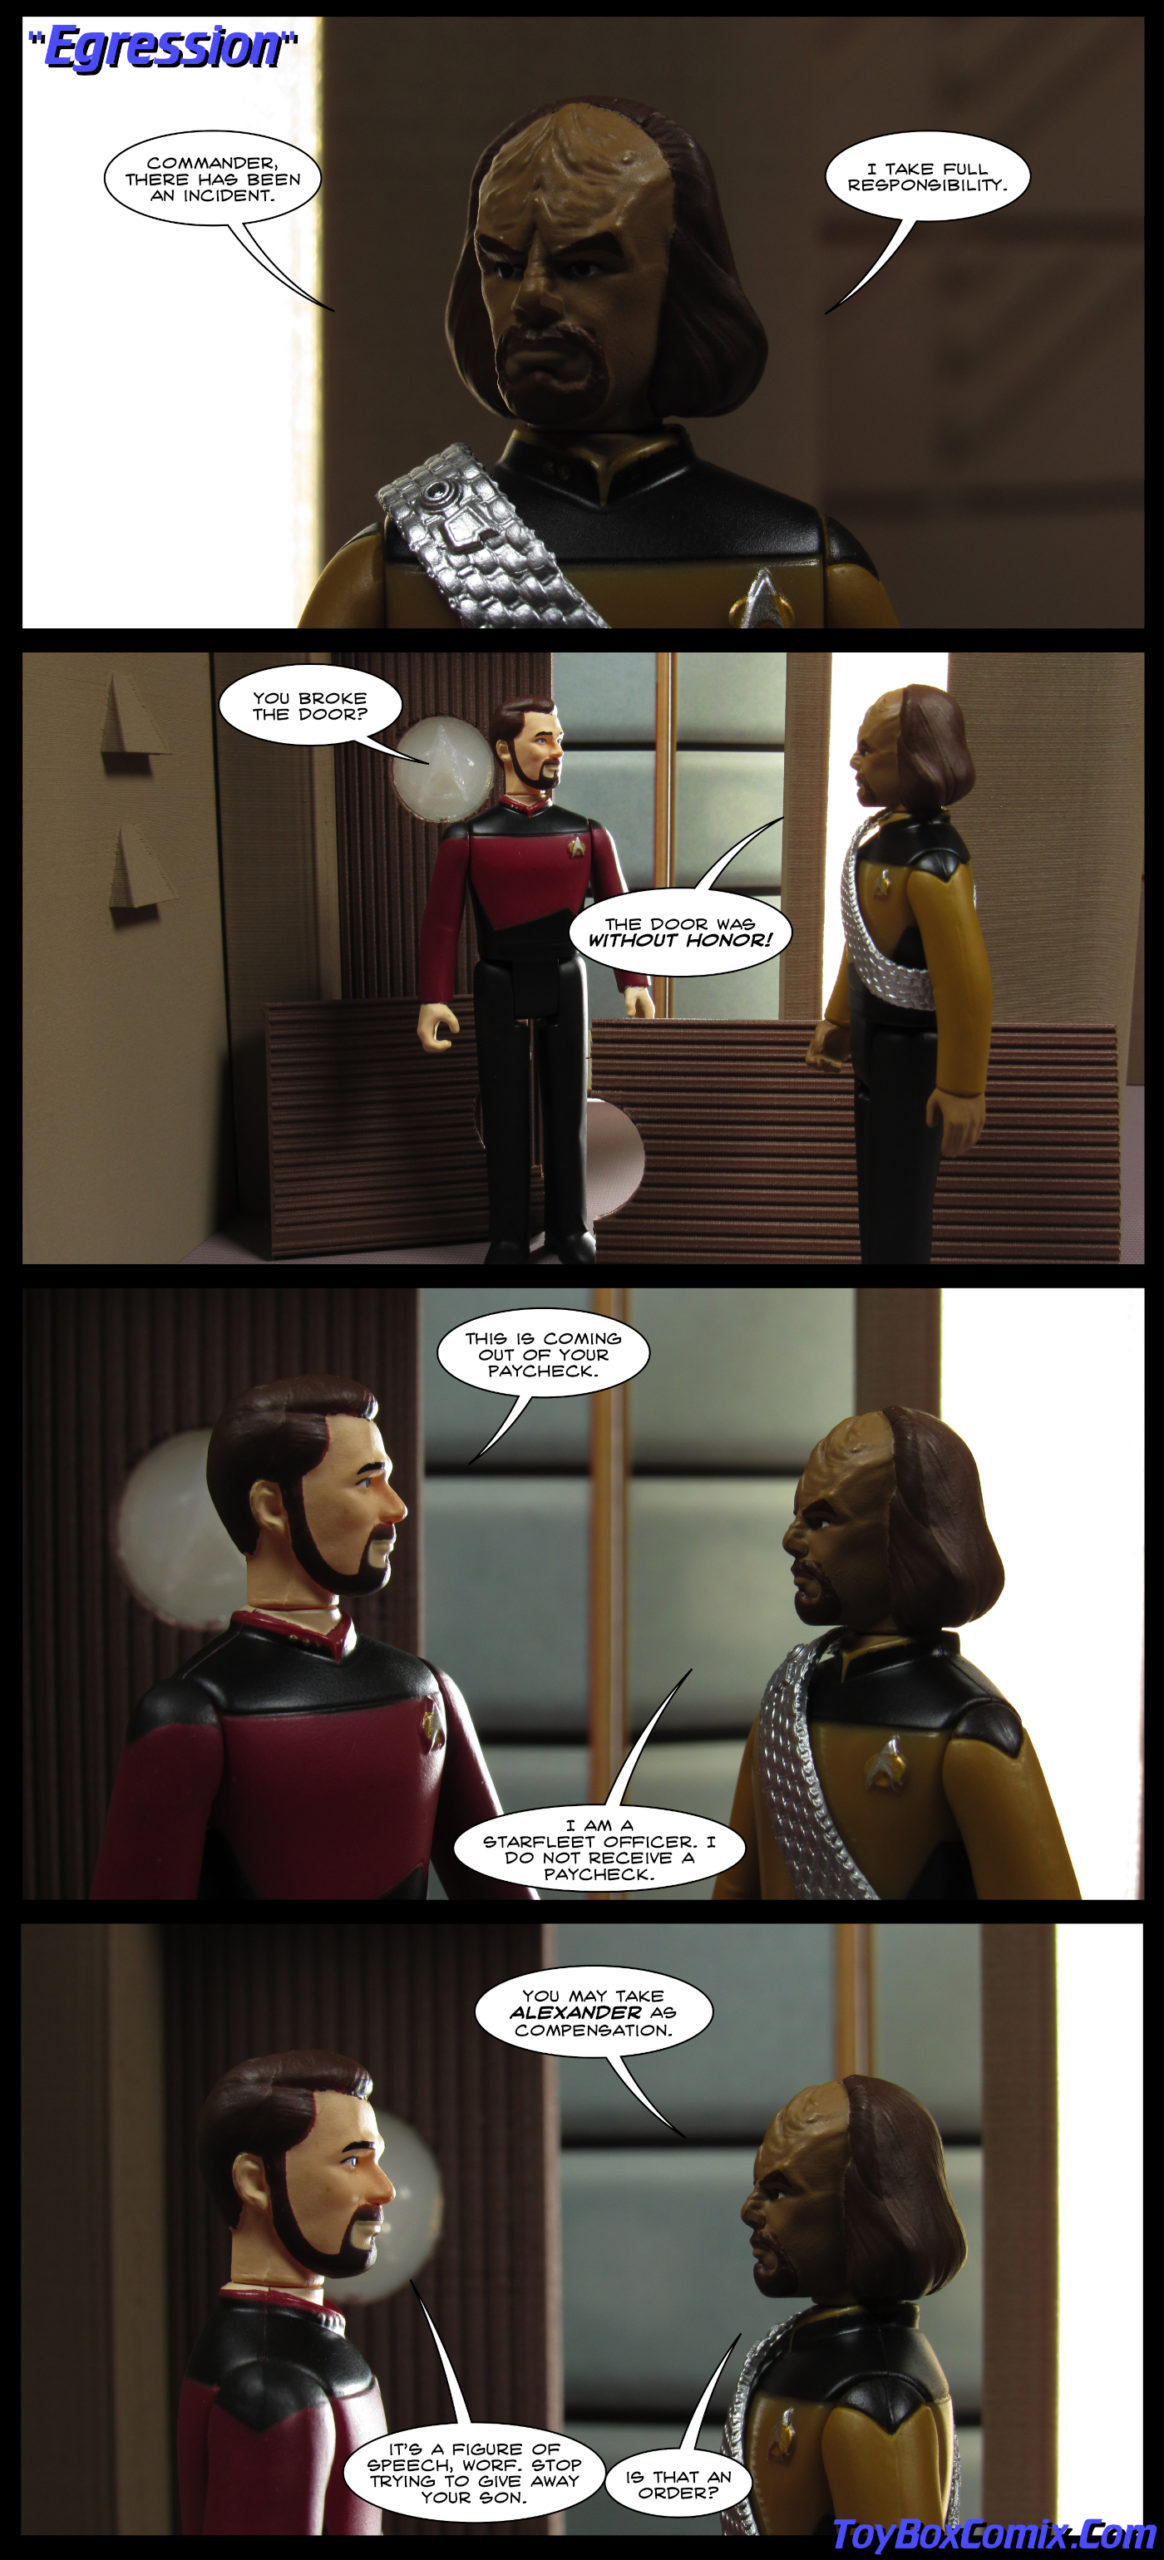 First panel: Star Trek: The Next Generation episode title: “Egression.” Worf: “Commander, there has been an incident. I take full responsibility.” Second panel: A door to Ten Forward lies broken on the floor. Riker: “You broke the door?” Worf: “The door was without honor!” Third panel: Riker: “This is coming out of your paycheck.” Worf: “I am a Starfleet officer. I do not receive a paycheck.” Fourth panel: Worf: “You may take Alexander as compensation.” Riker: “It’s a figure of speech, Worf. Stop trying to give away your son.” Worf: “Is that an order?”